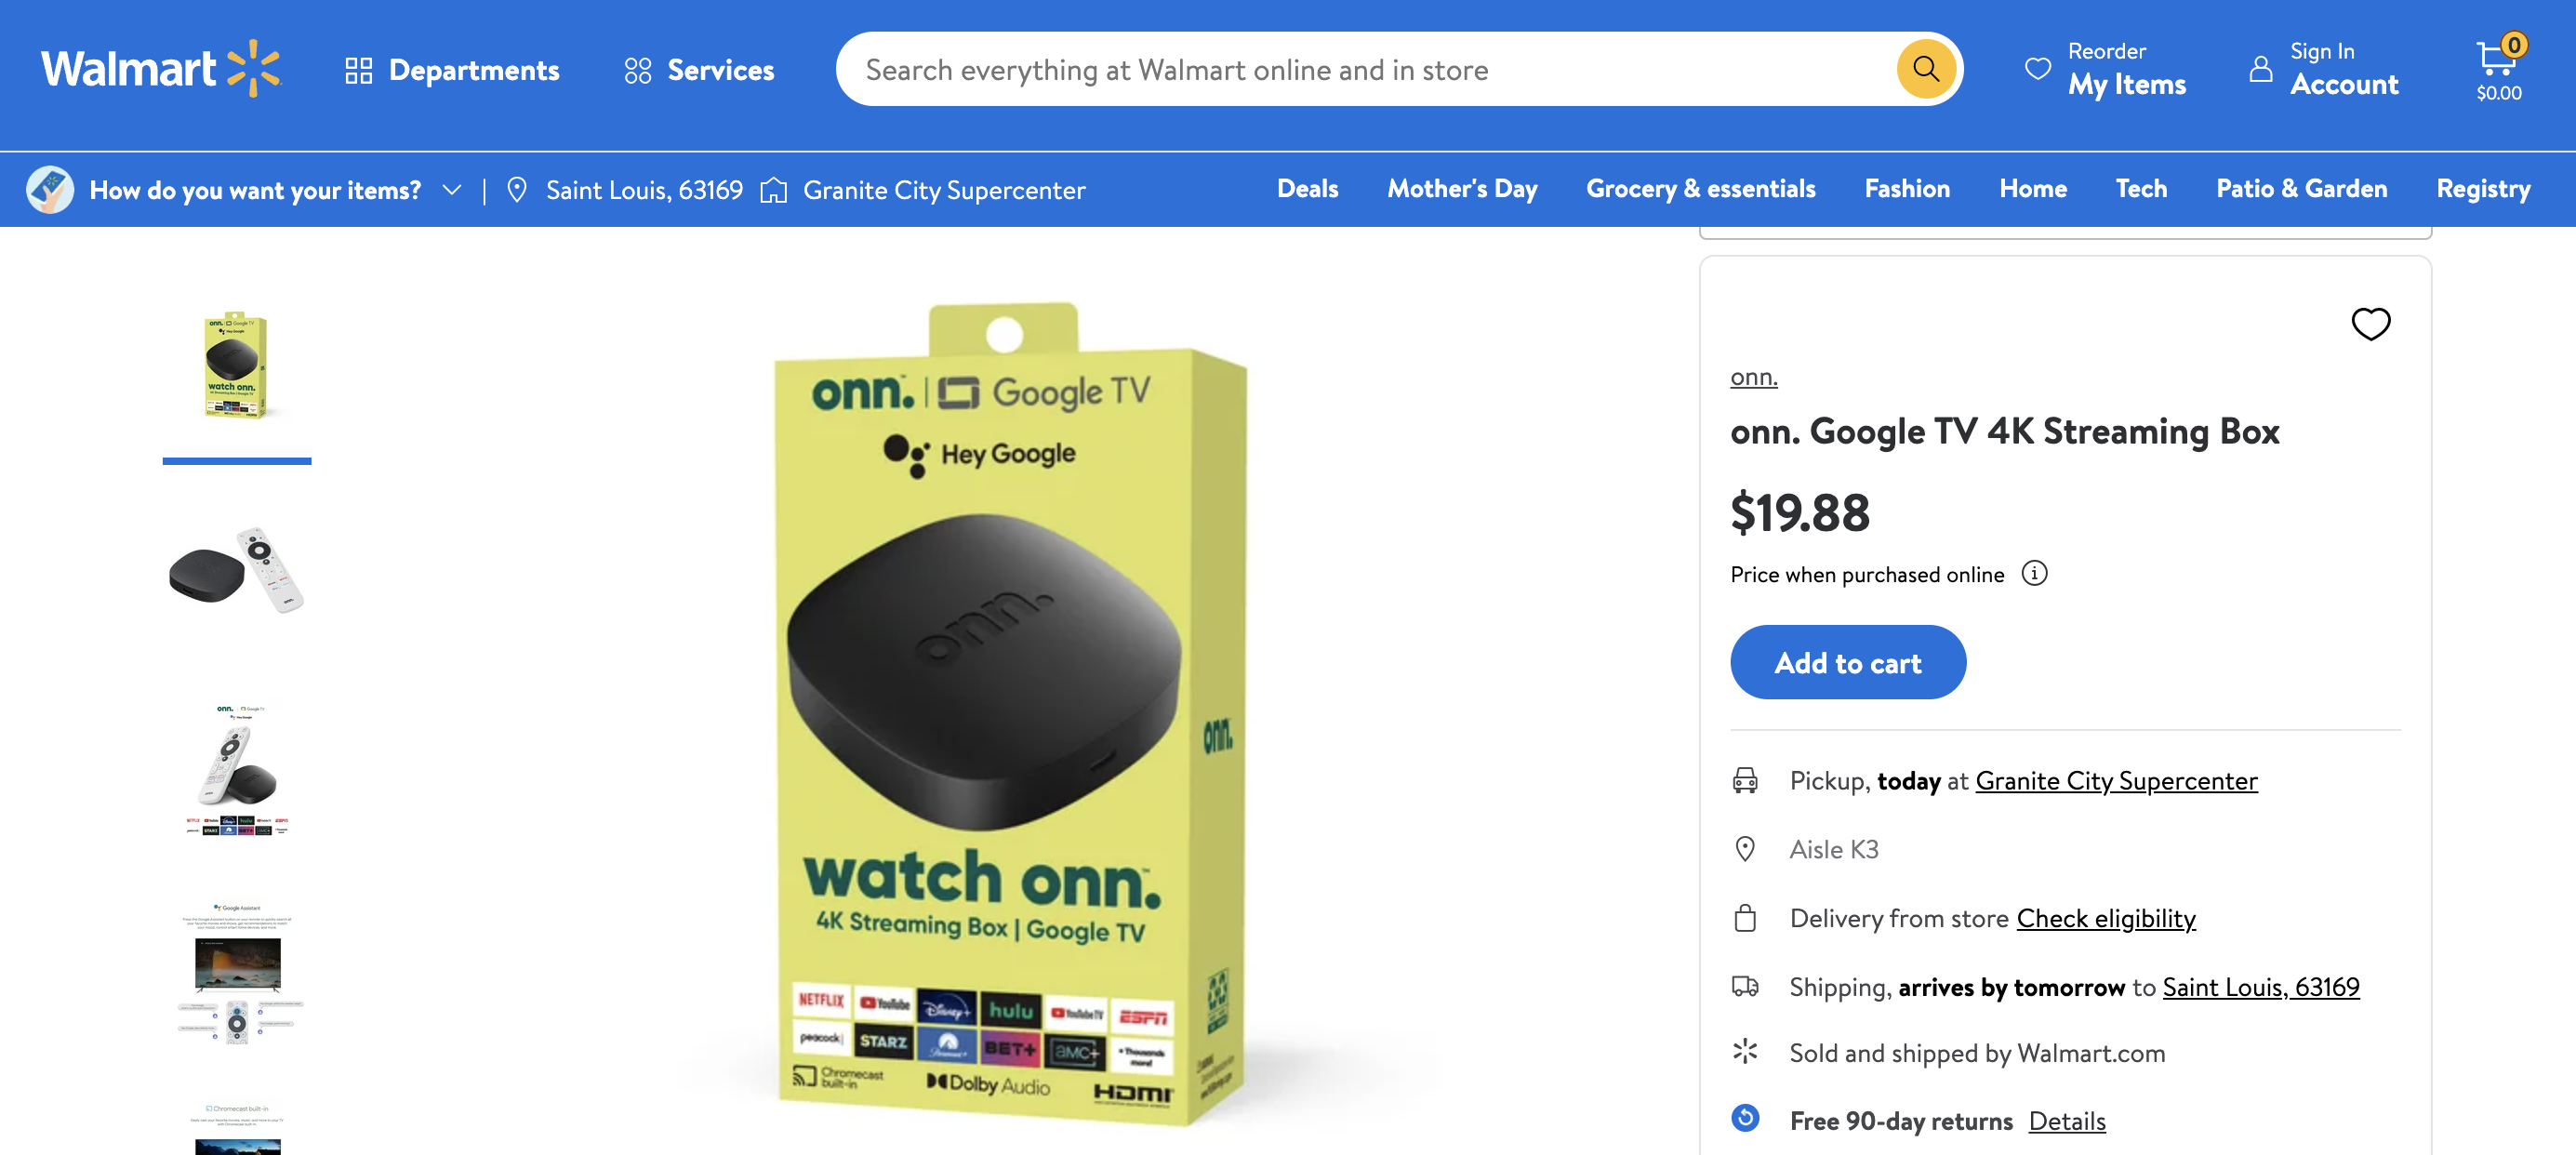 The Onn Google TV 4K Streaming Box was officially released to the public on April 21, 2023 and is exclusively sold through Walmart stores in the US including online.